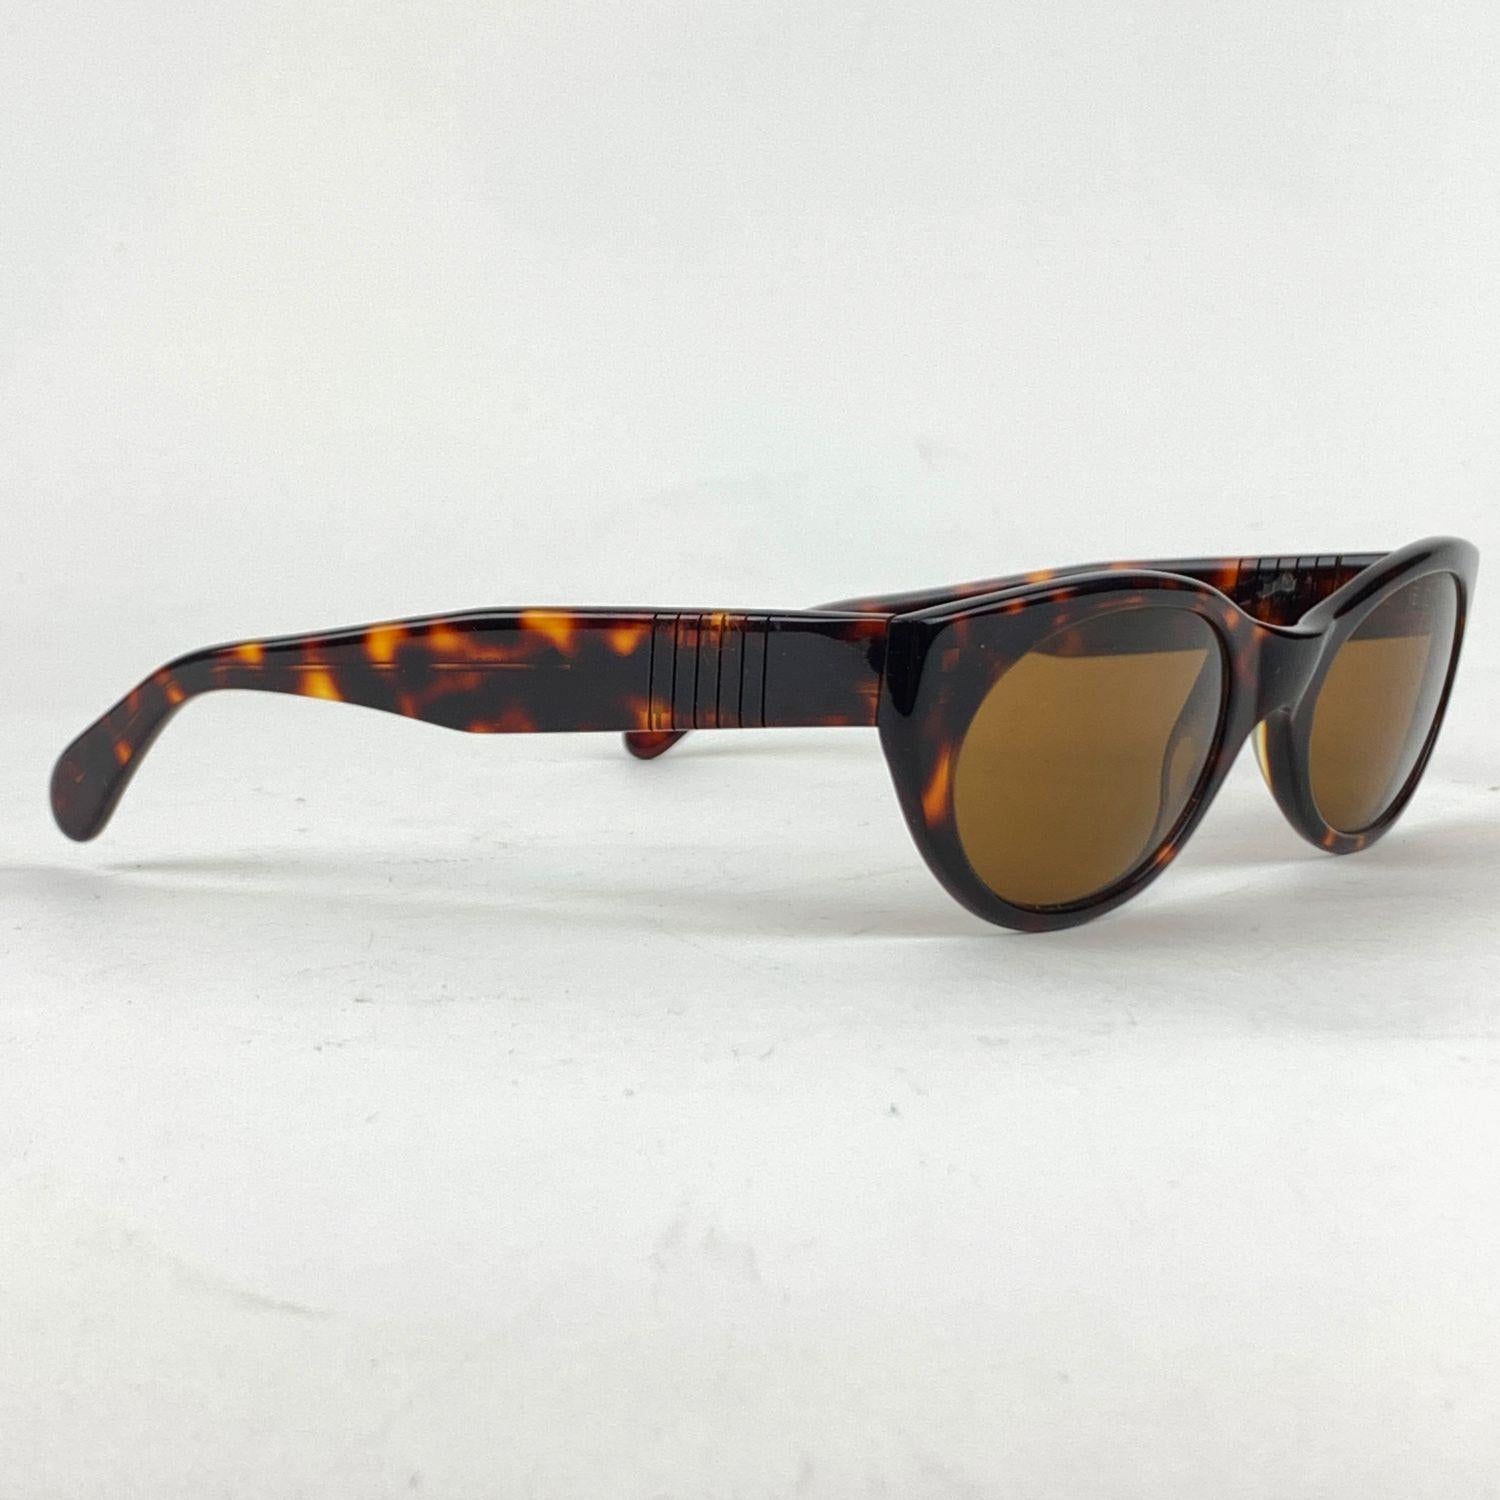 PERSOL Vintage Sunglasses- Model: 660. Brown havana acetate frame, with original Persol brown 100% UV protection lenses. Flexible temples. Made in Italy. Style & Refs:660 - 54/21 - 140 - 24


Details

MATERIAL: Acetate

COLOR: Brown

MODEL: